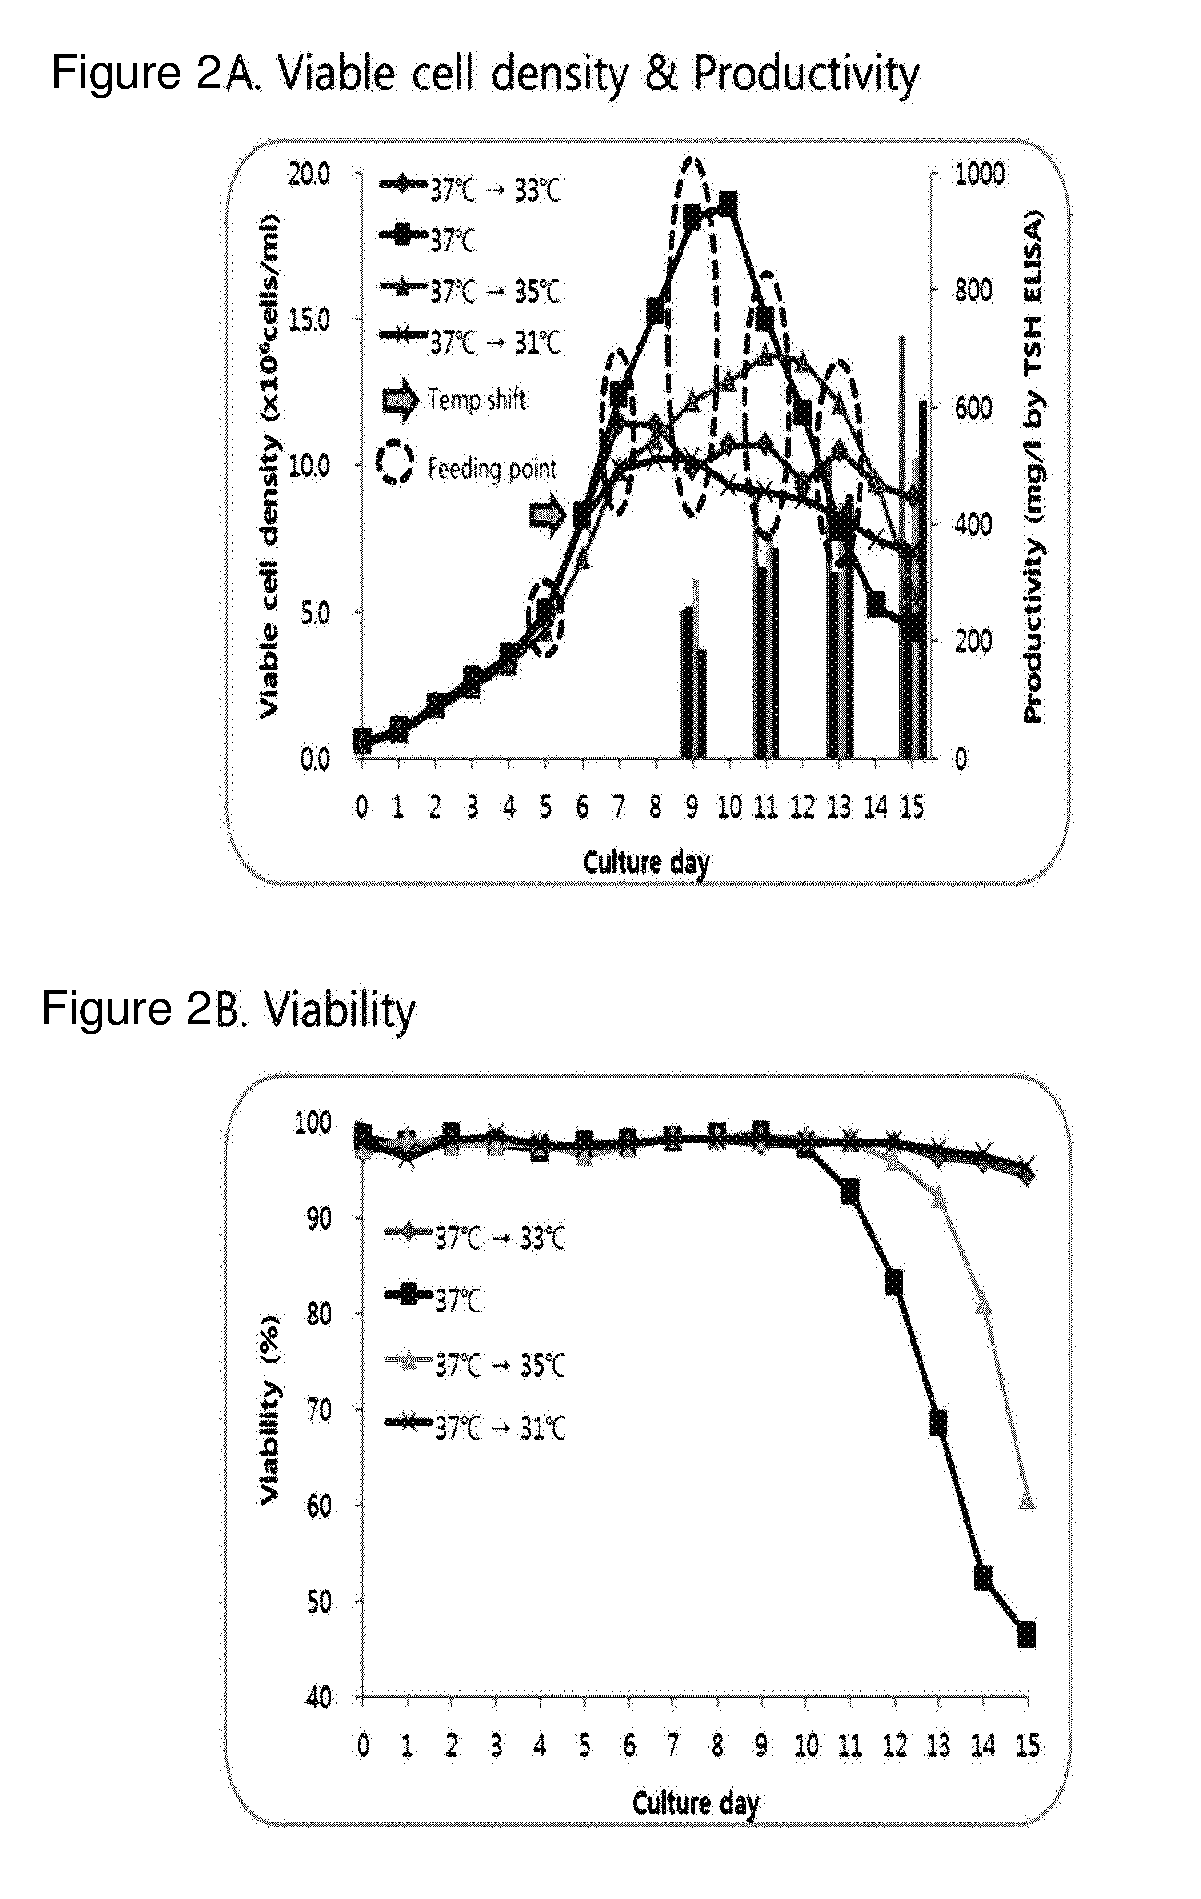 Composition comprising recombinant human thyroid stimulating hormone and method for producing recombinant human thyroid stimulating hormone